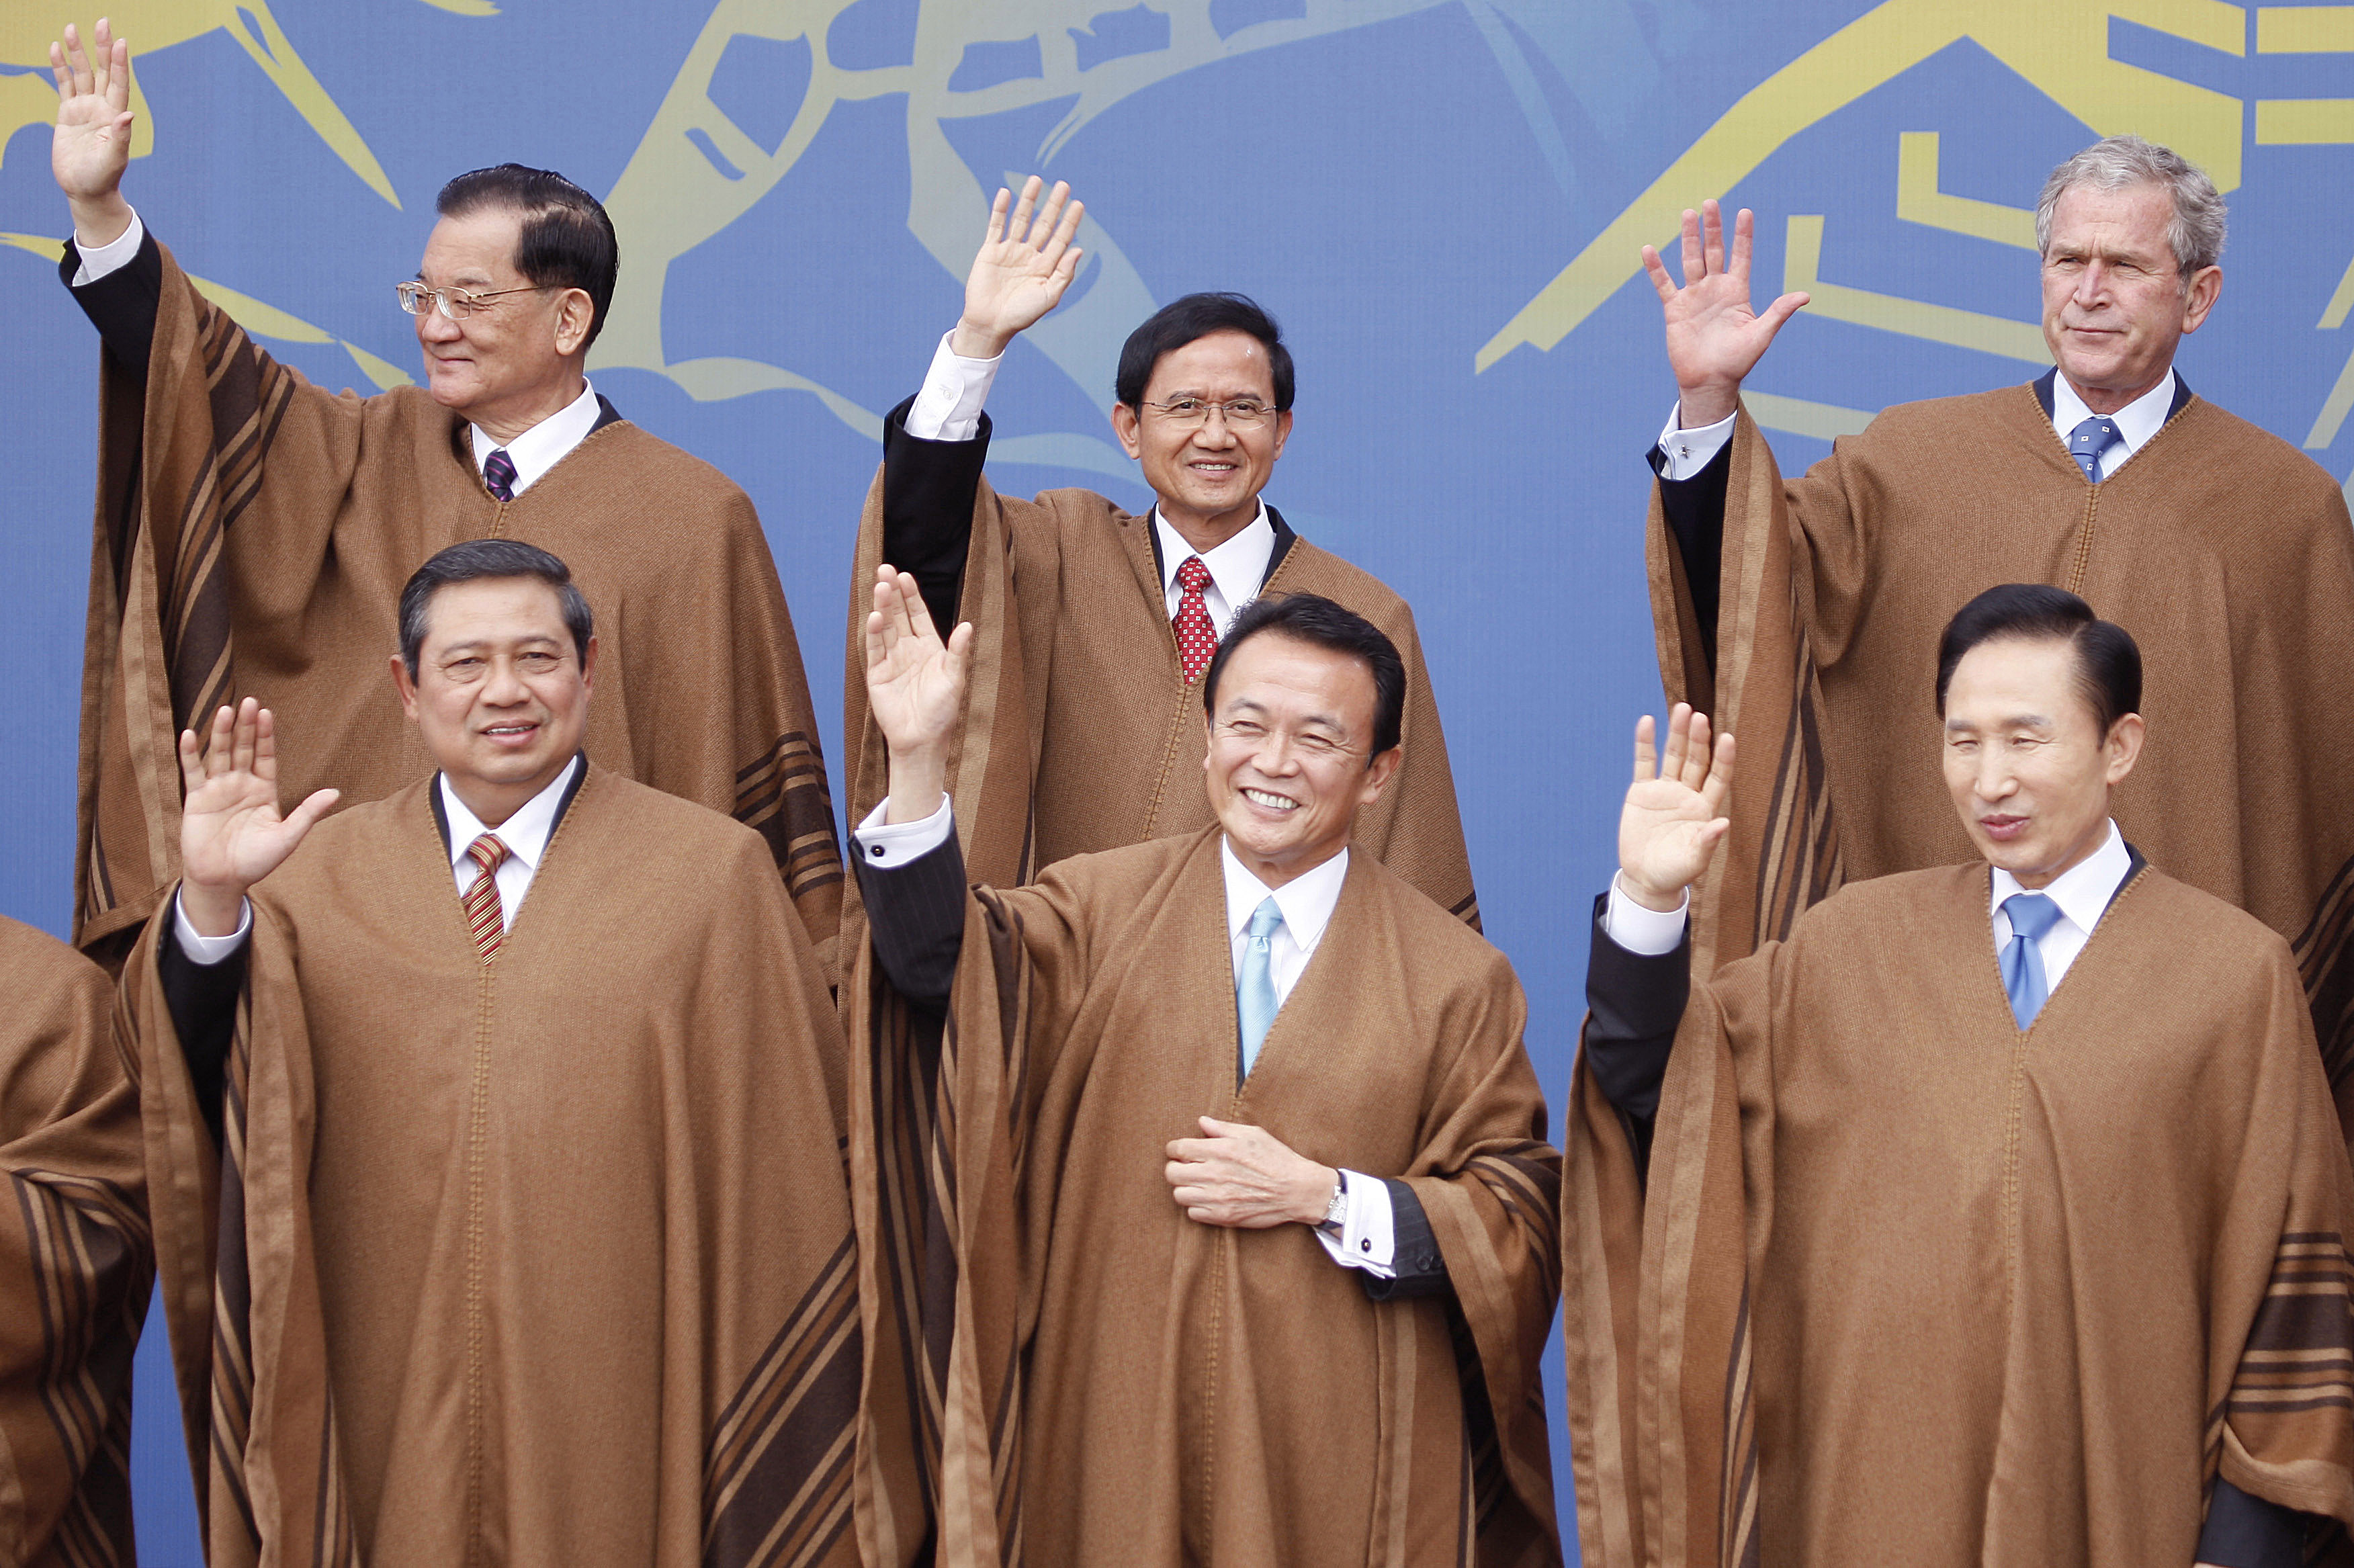 World leaders are seen waving in a group photo while donning traditional Peruvian attire.